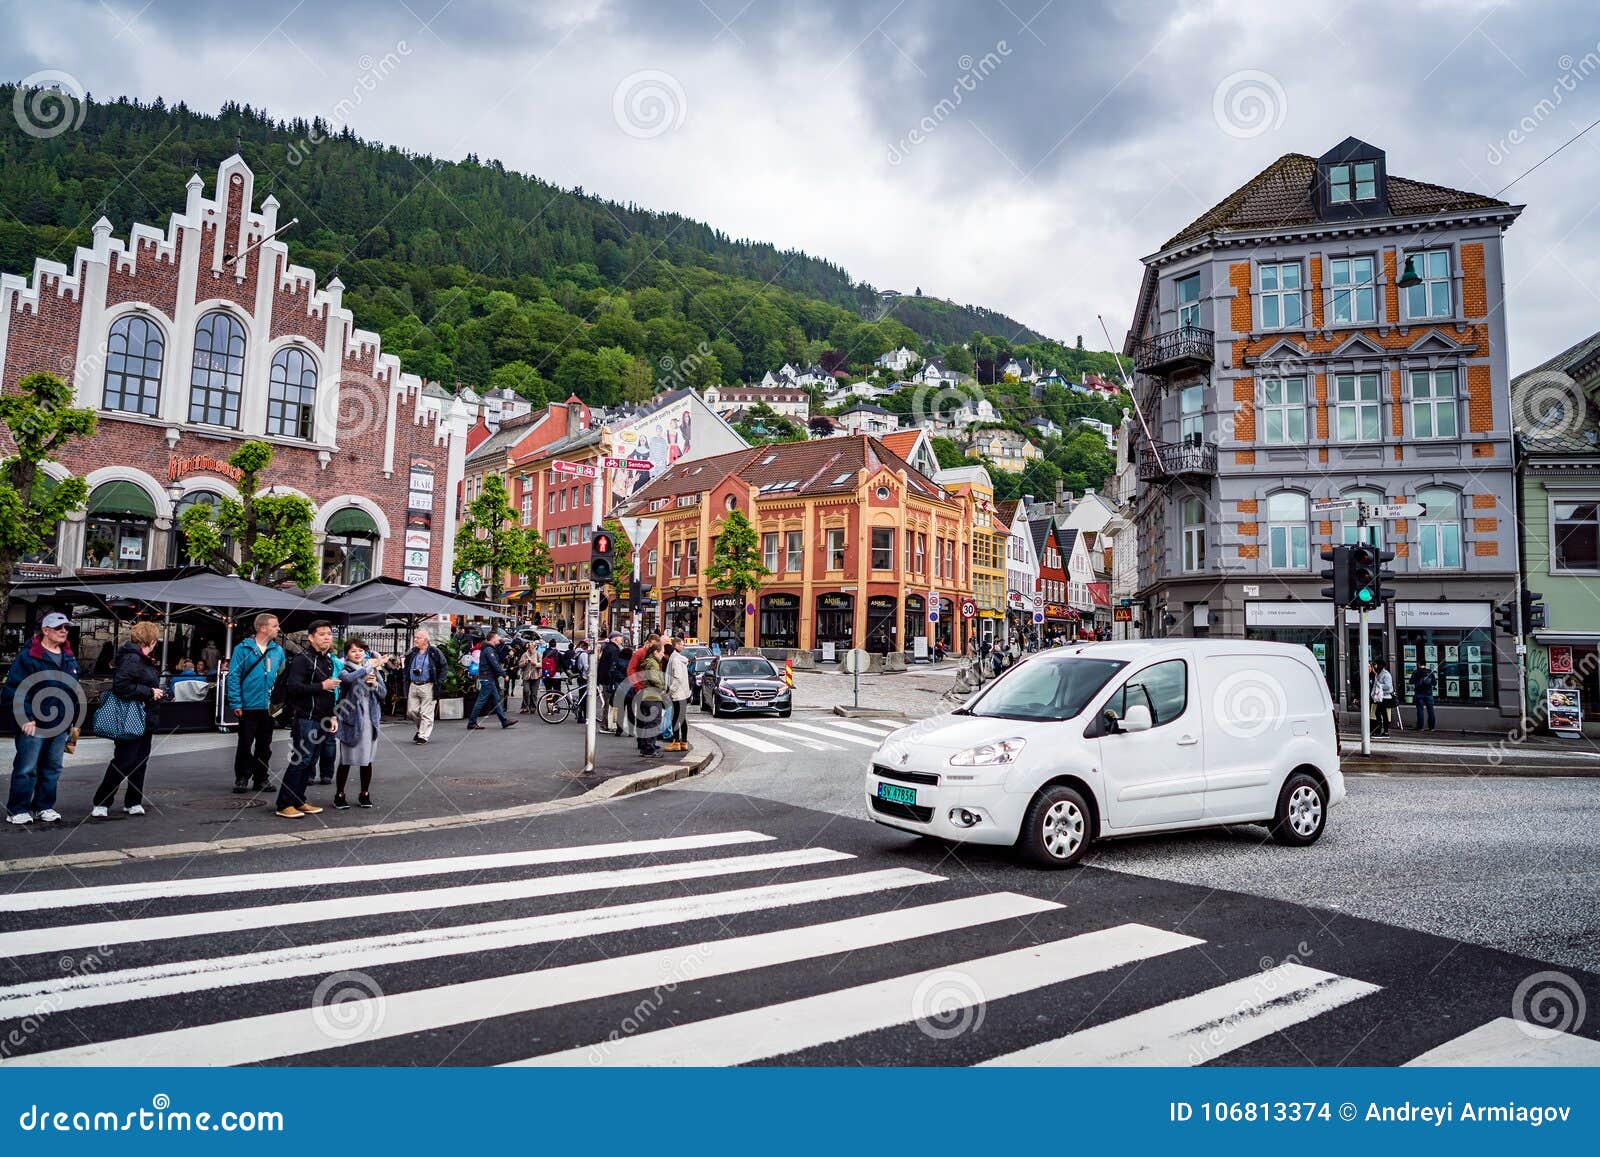 BERGEN, NORWAY - JUNE 15,2017: Bergen is a City and Municipality ...